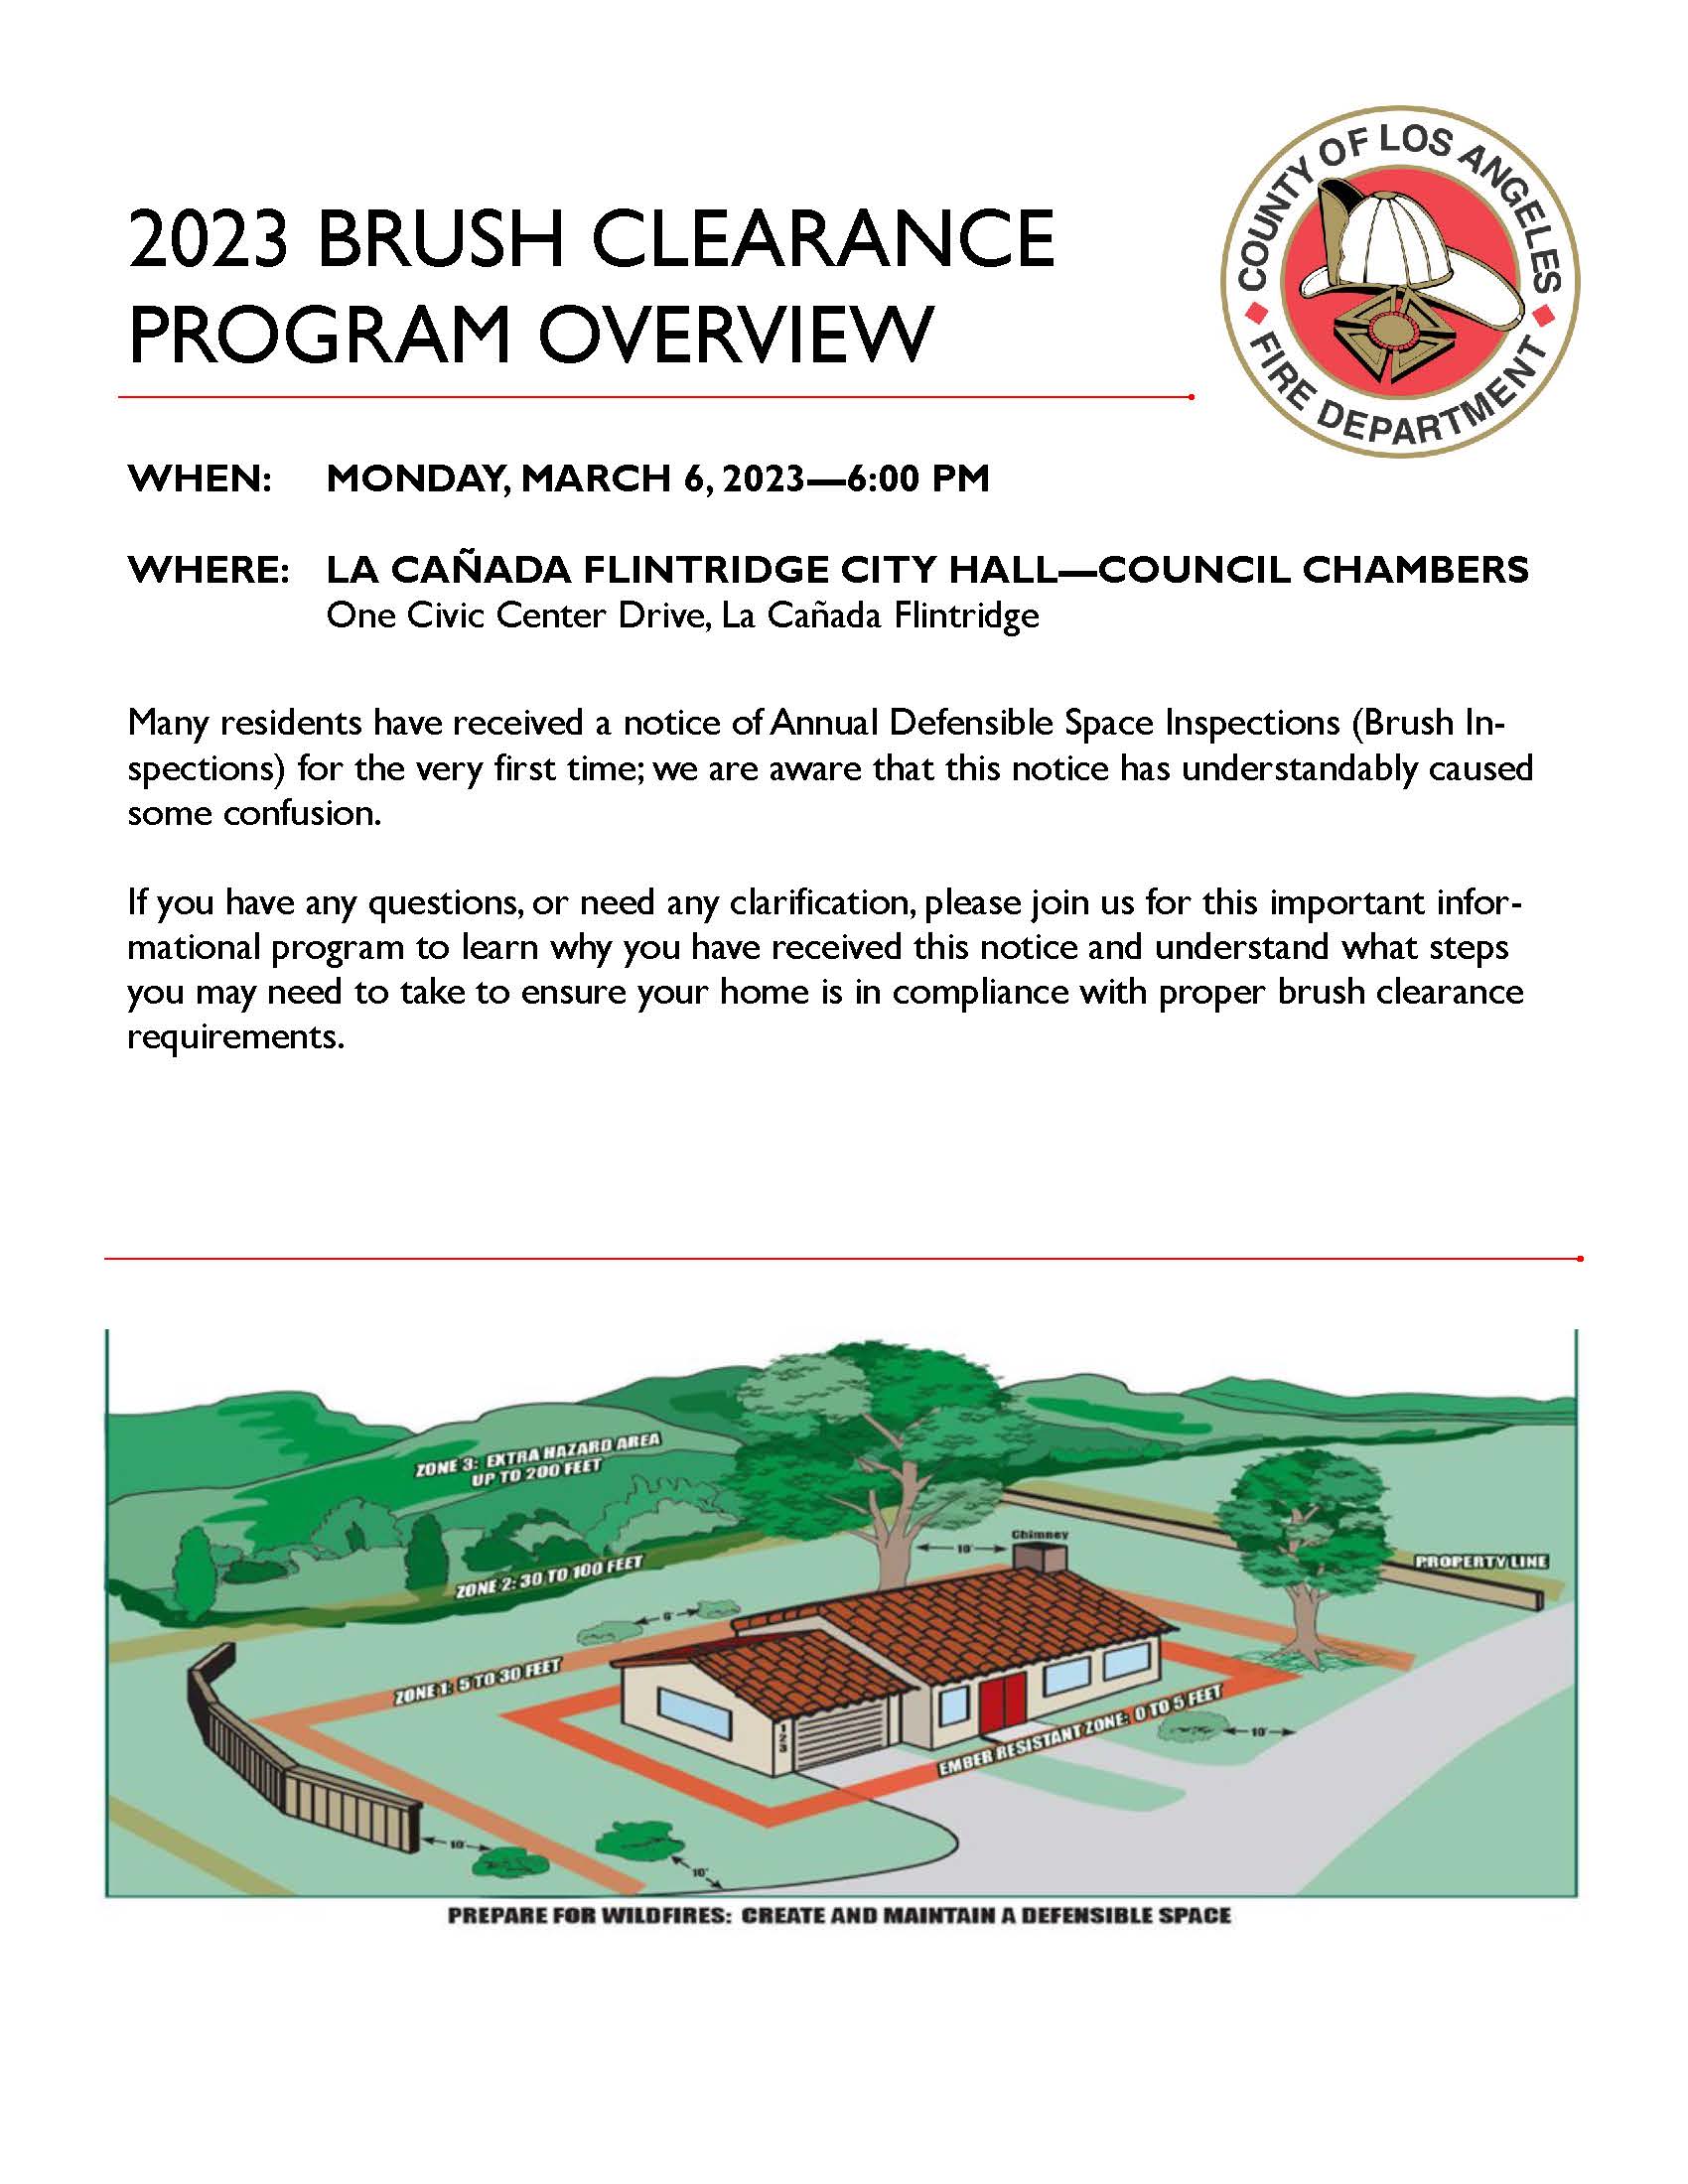 Join us for a Brush Clearance Program Overview on March 6, 2023 at 6 PM at City Council Chambers at One Civic Center Drive, La Cañada Flintridge.